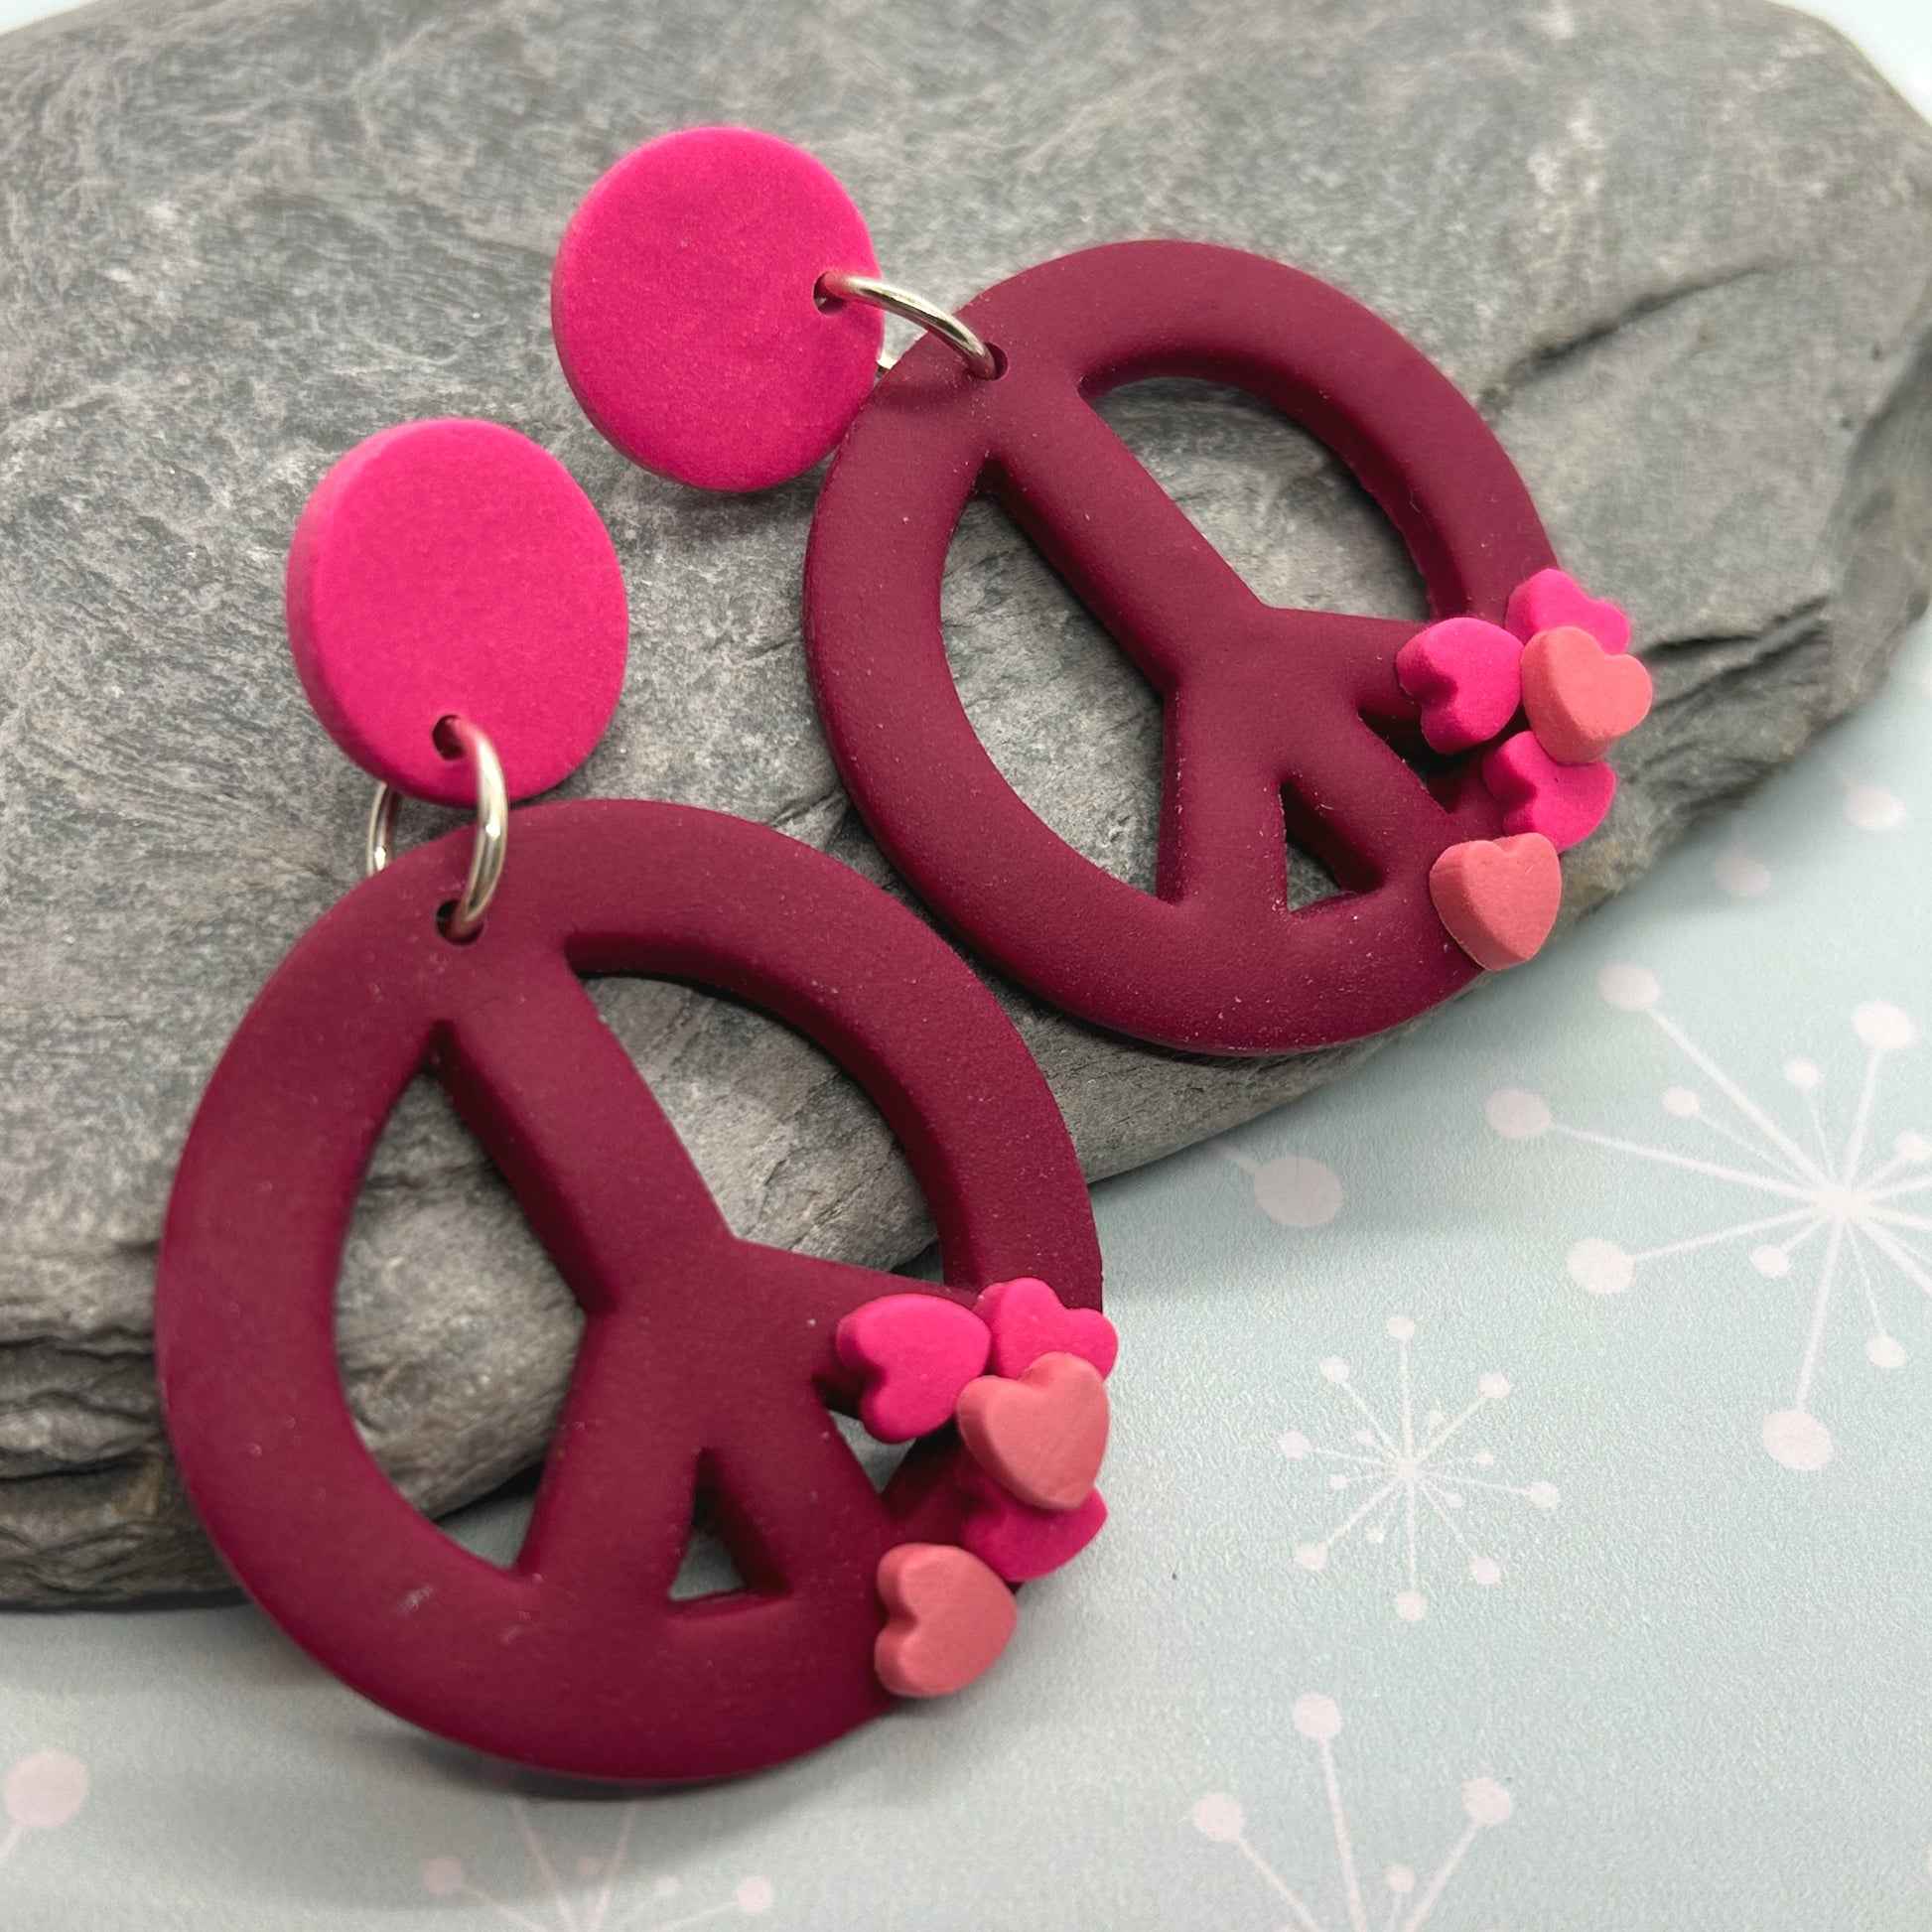 Bruce - peace love and harmony earrings - The Argentum Design Co